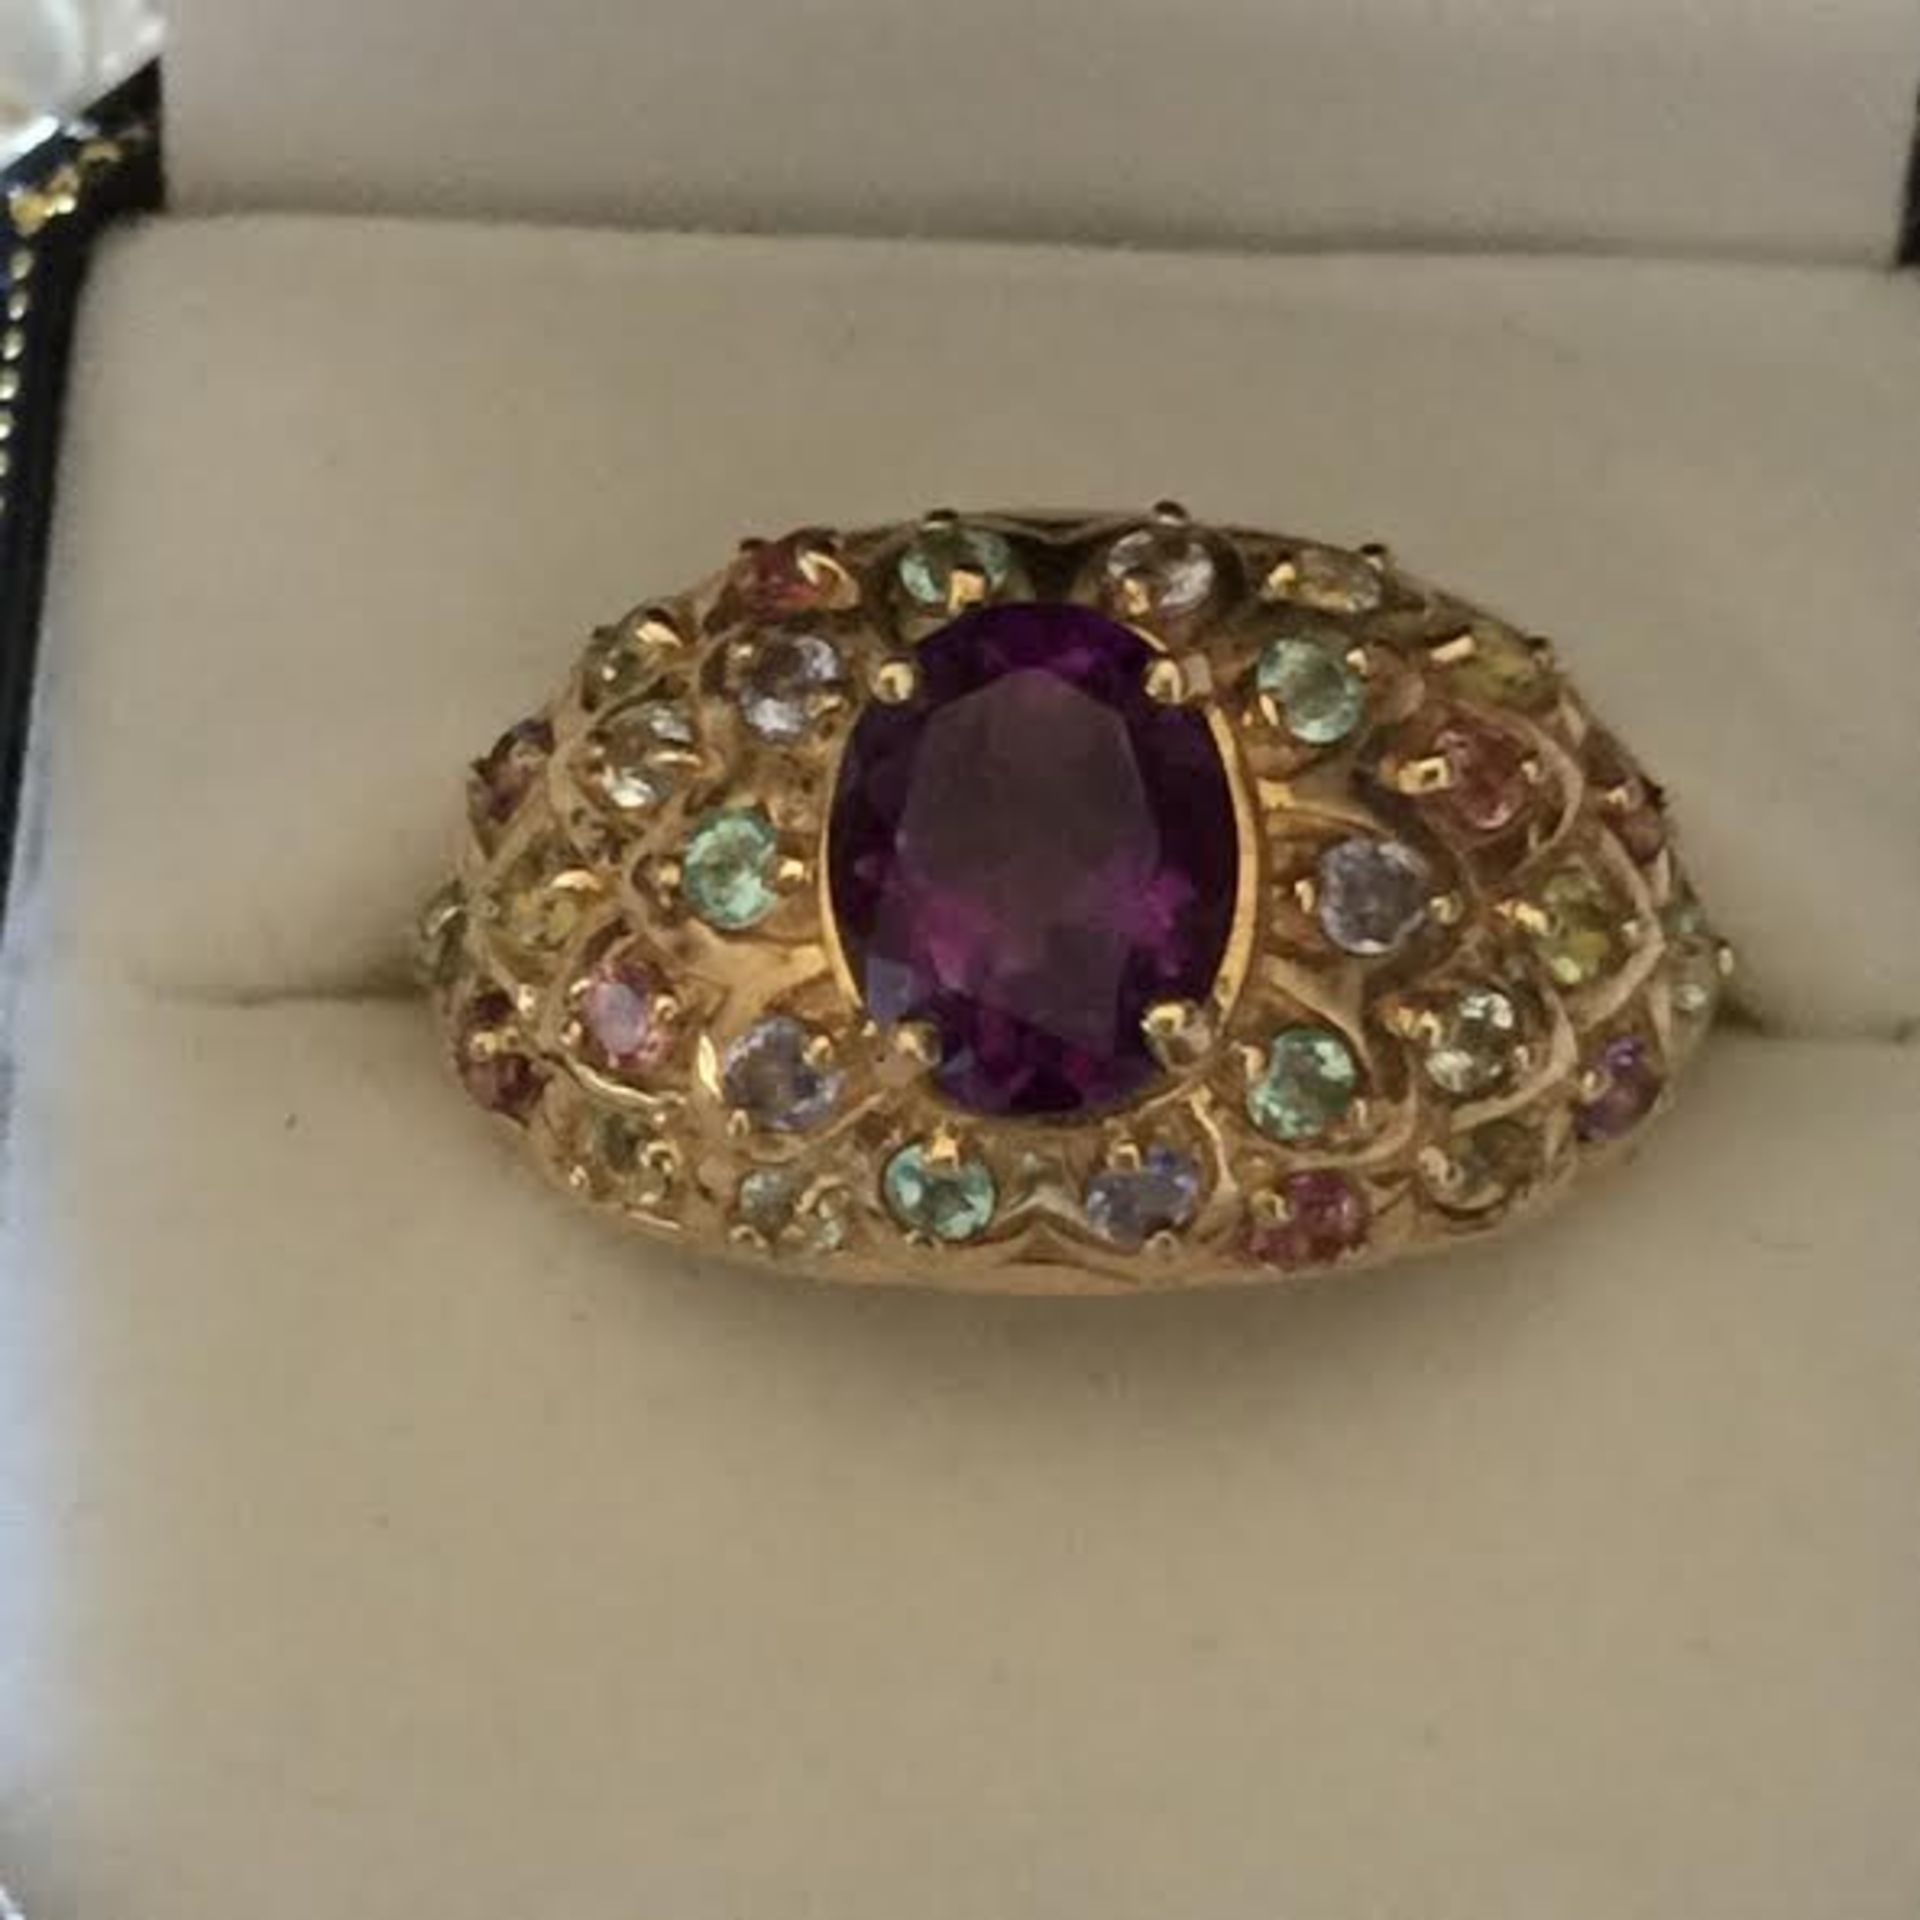 10 ct gold ring with amethyst non other gems very large ring